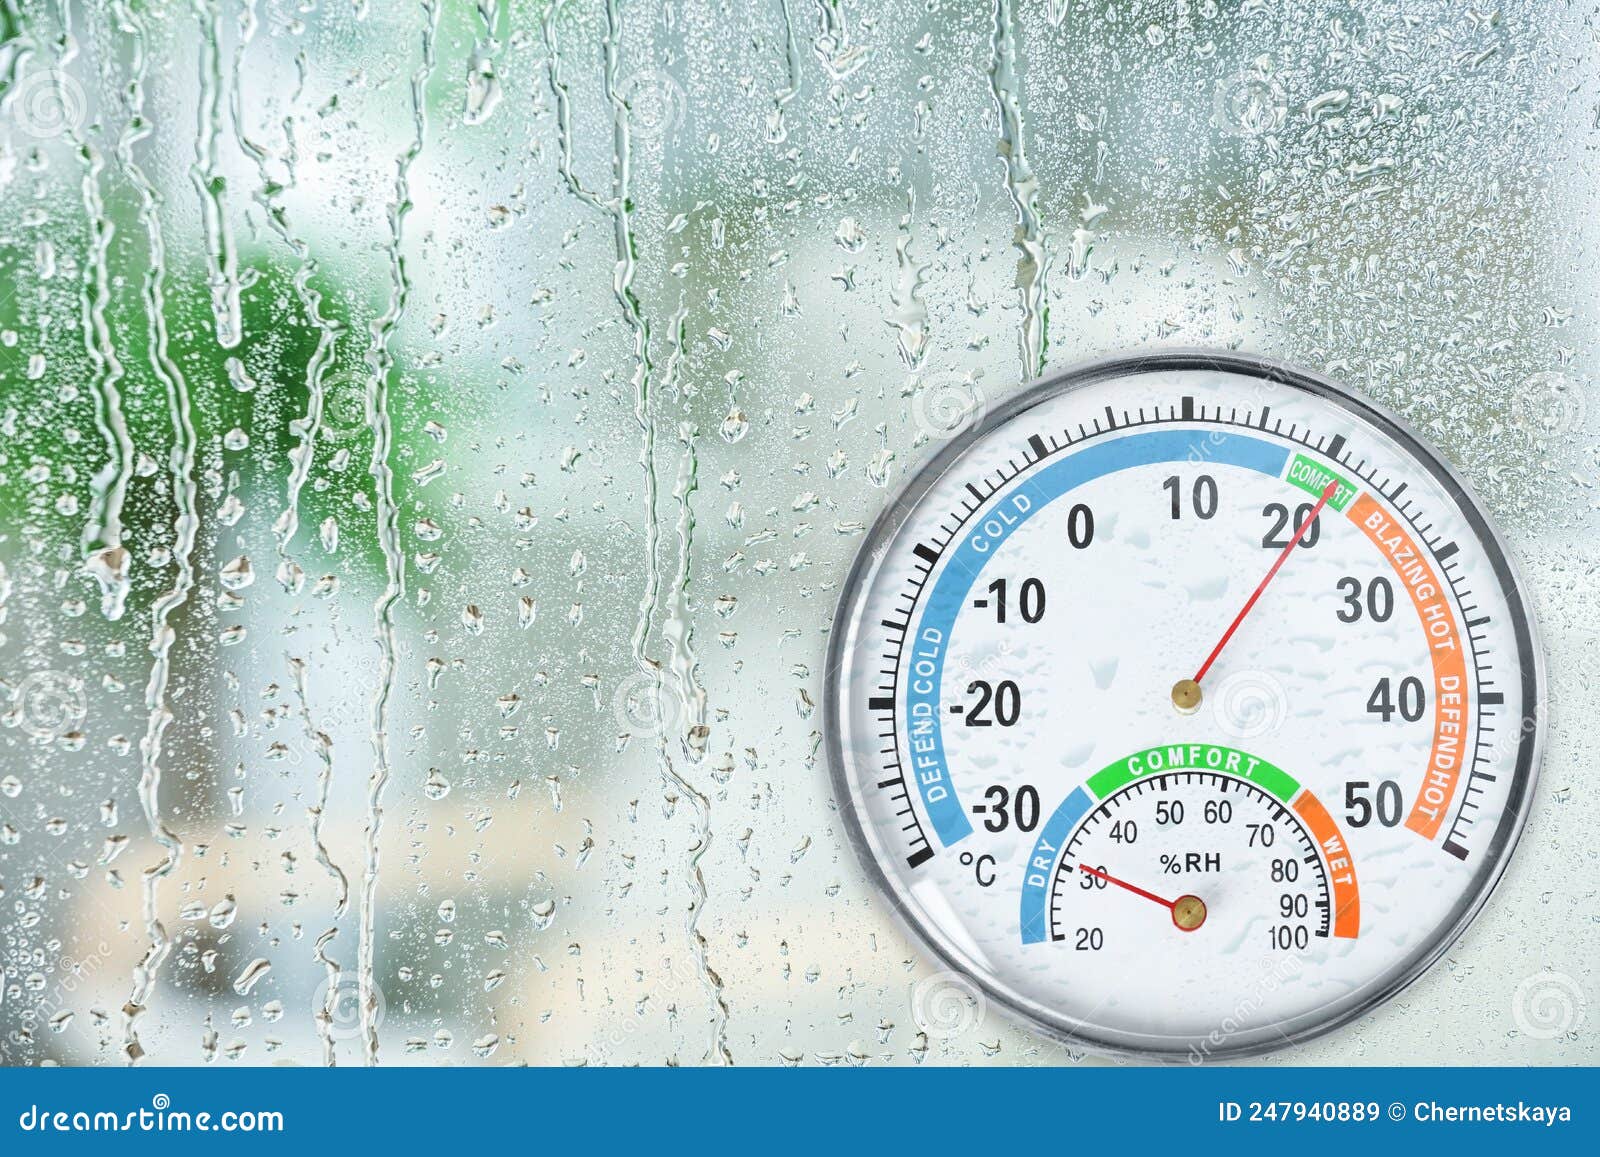 https://thumbs.dreamstime.com/z/mechanical-hygrometer-thermometer-glass-water-drops-space-text-247940889.jpg